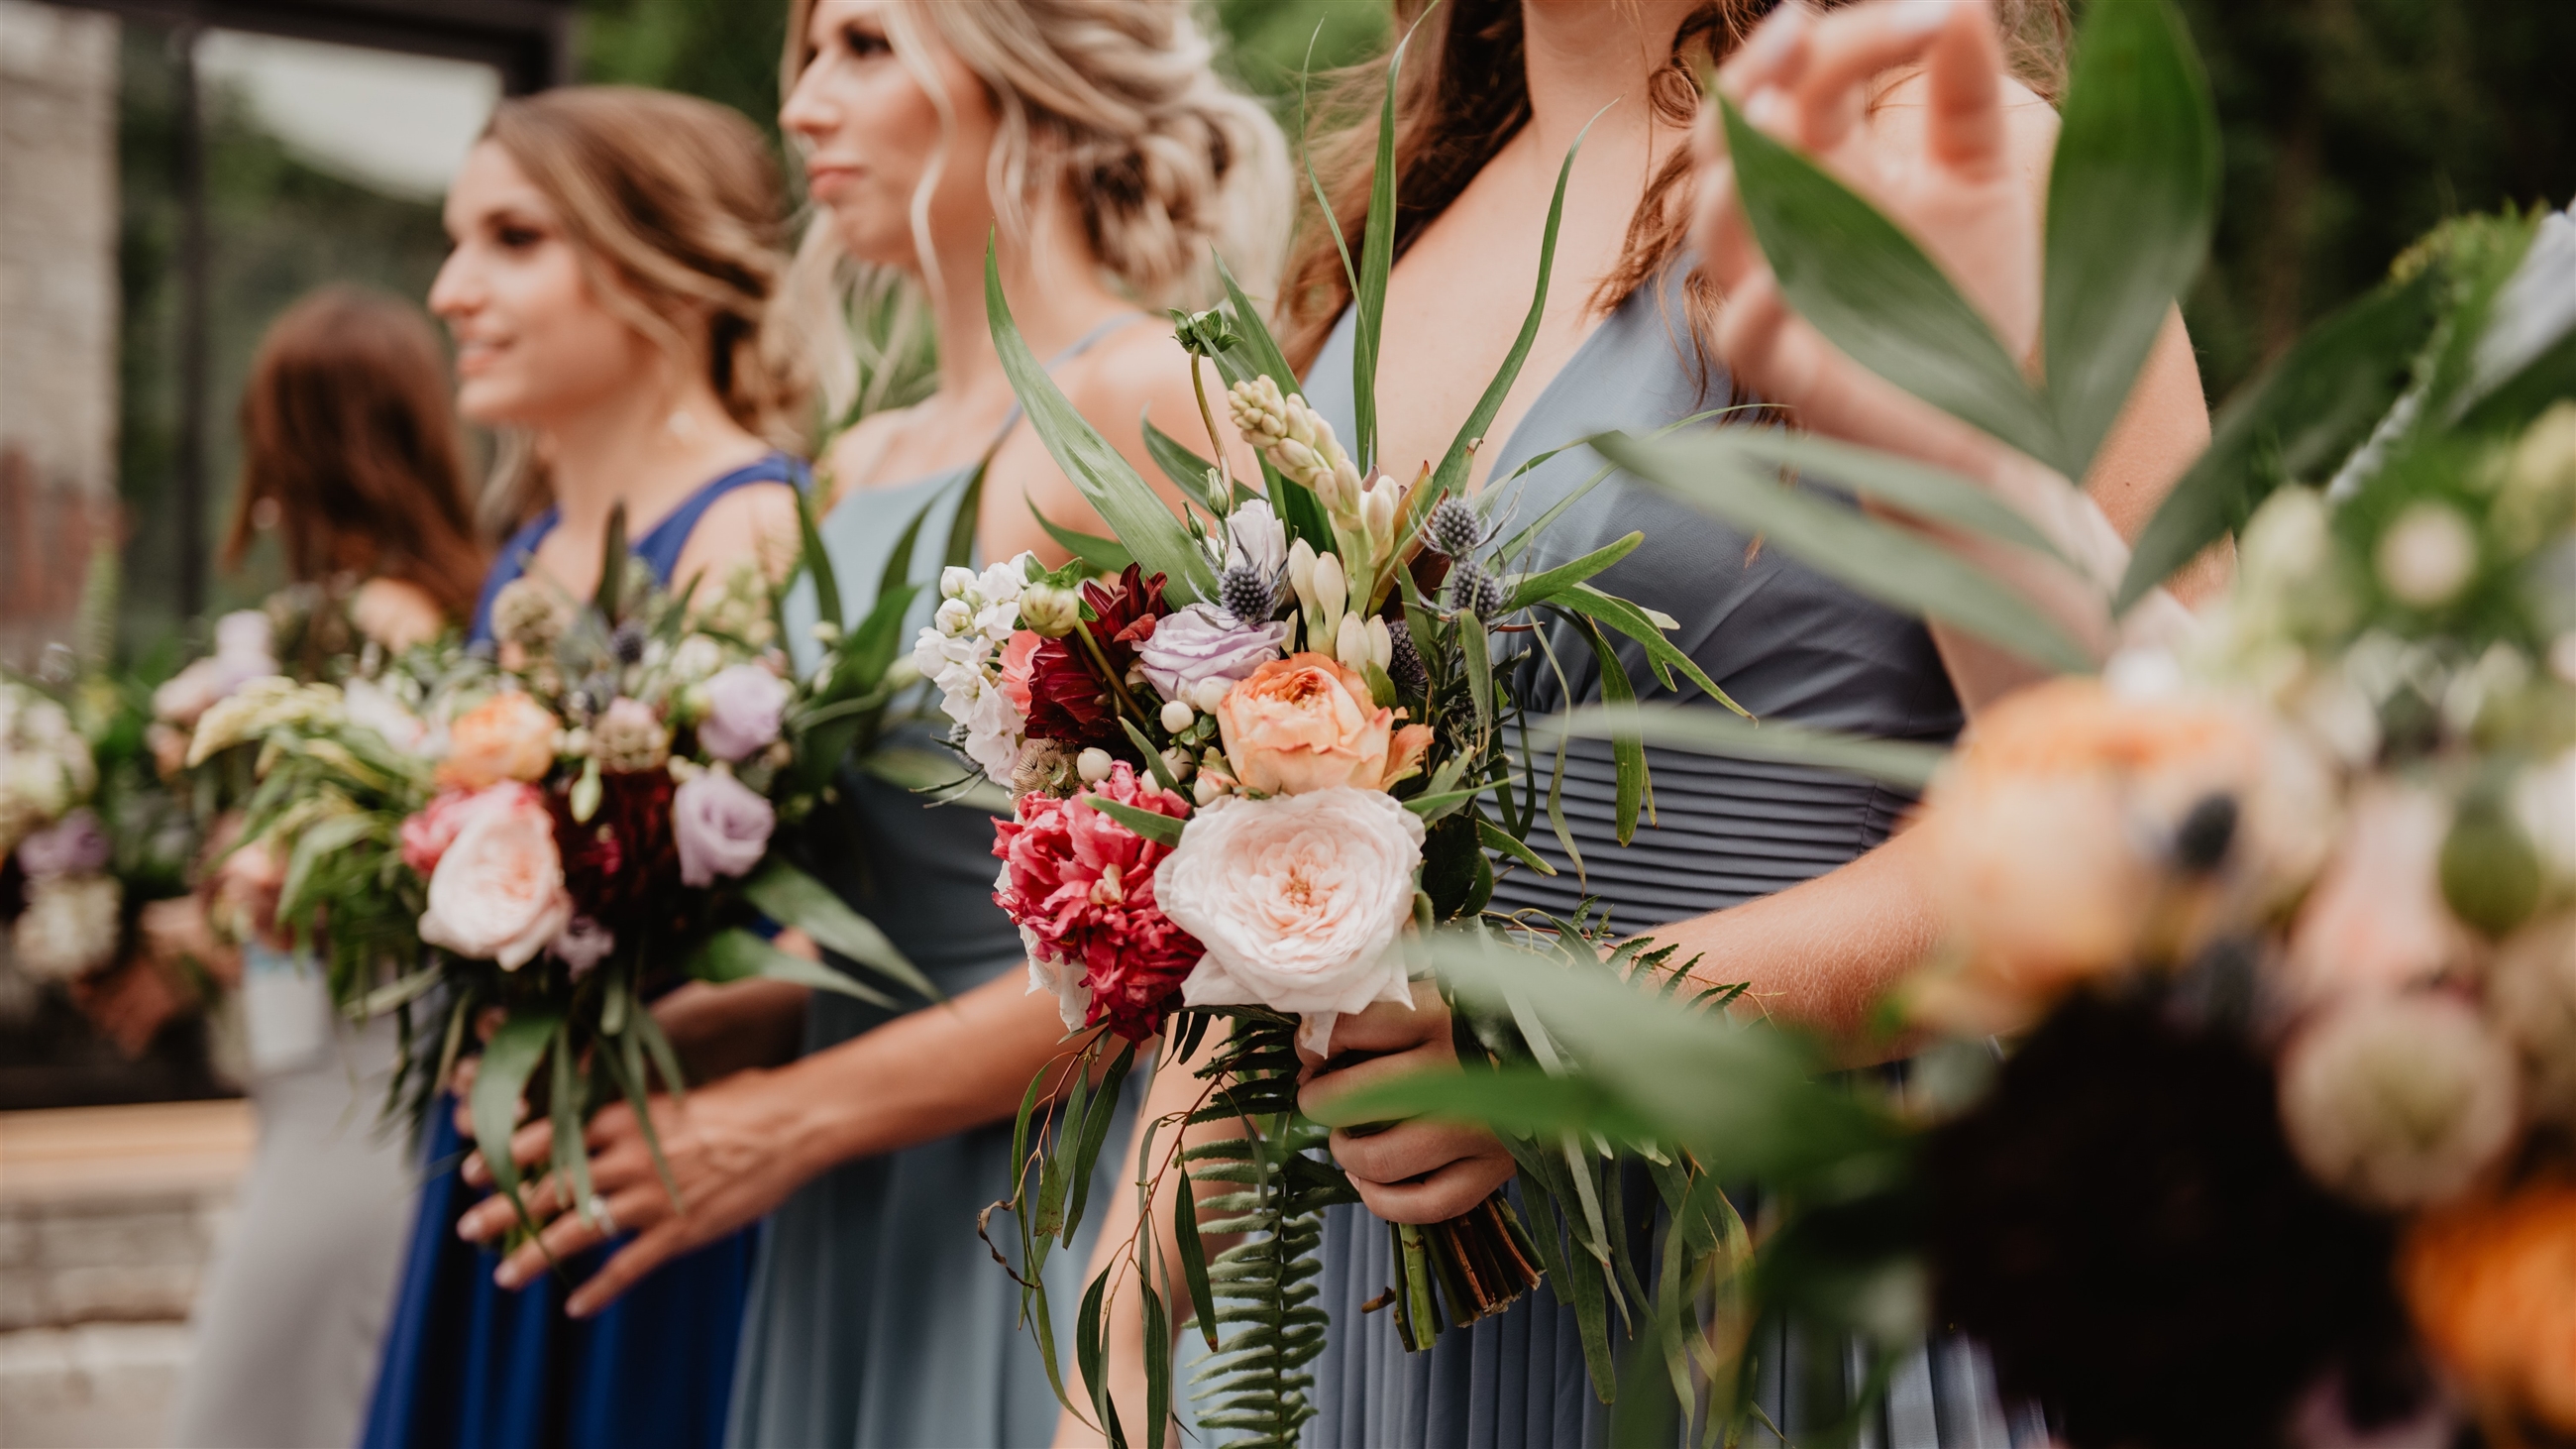 The Bride is Panicking: How to Be a Supportive Bridesmaid During COVID-19 Desktop Image